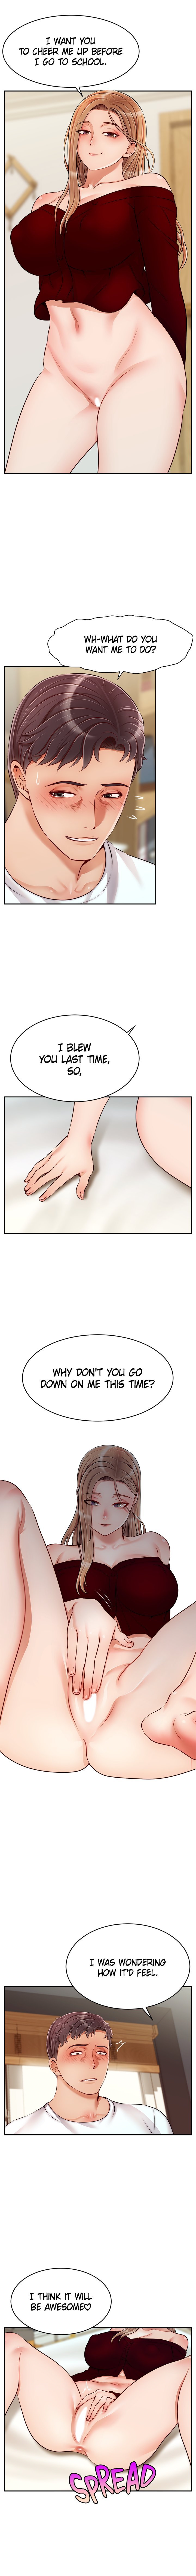 its-okay-because-were-family-chap-35-7